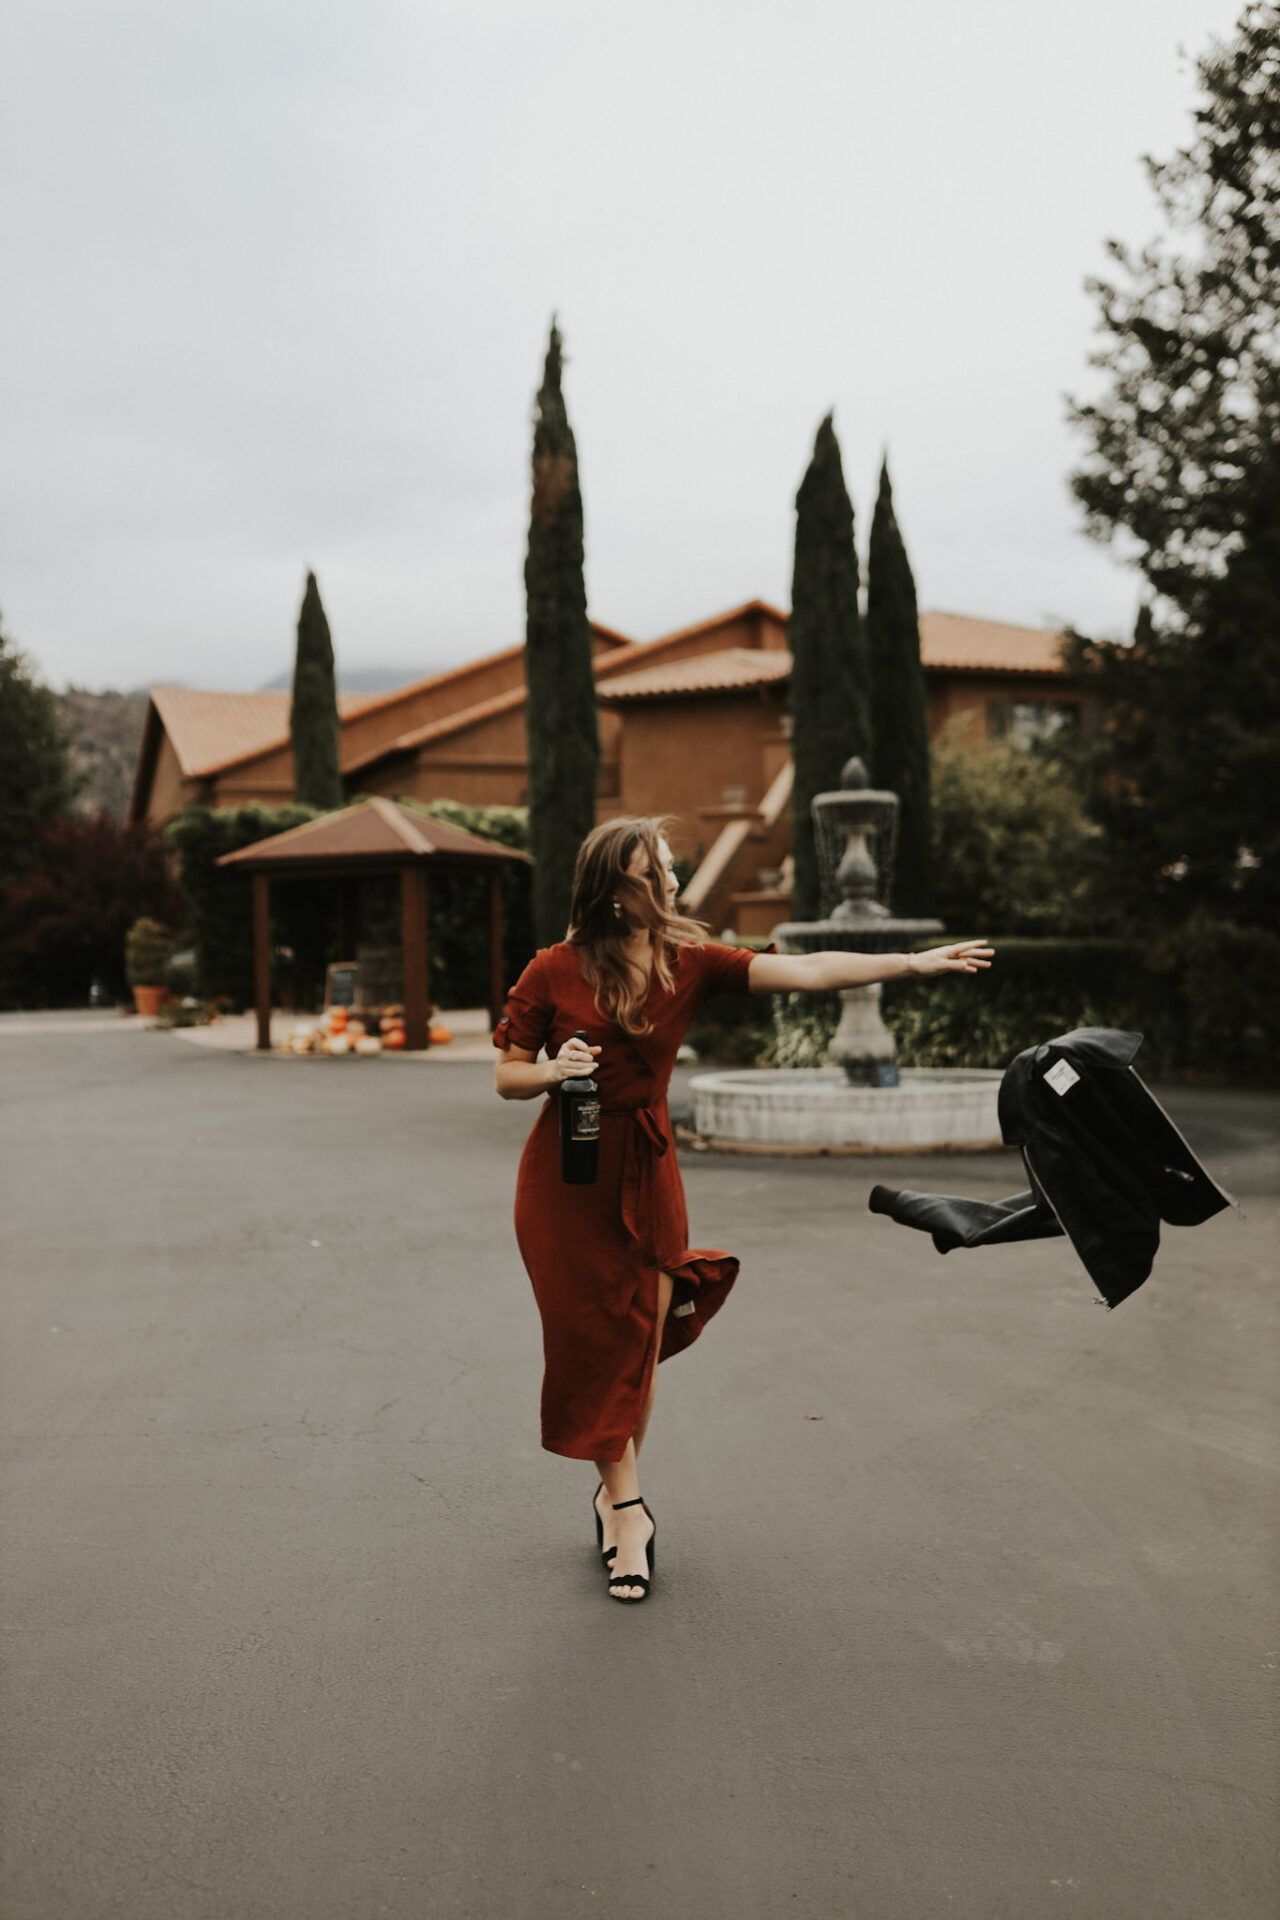 Paige at a winery thinking about Drinking captions for Instagram